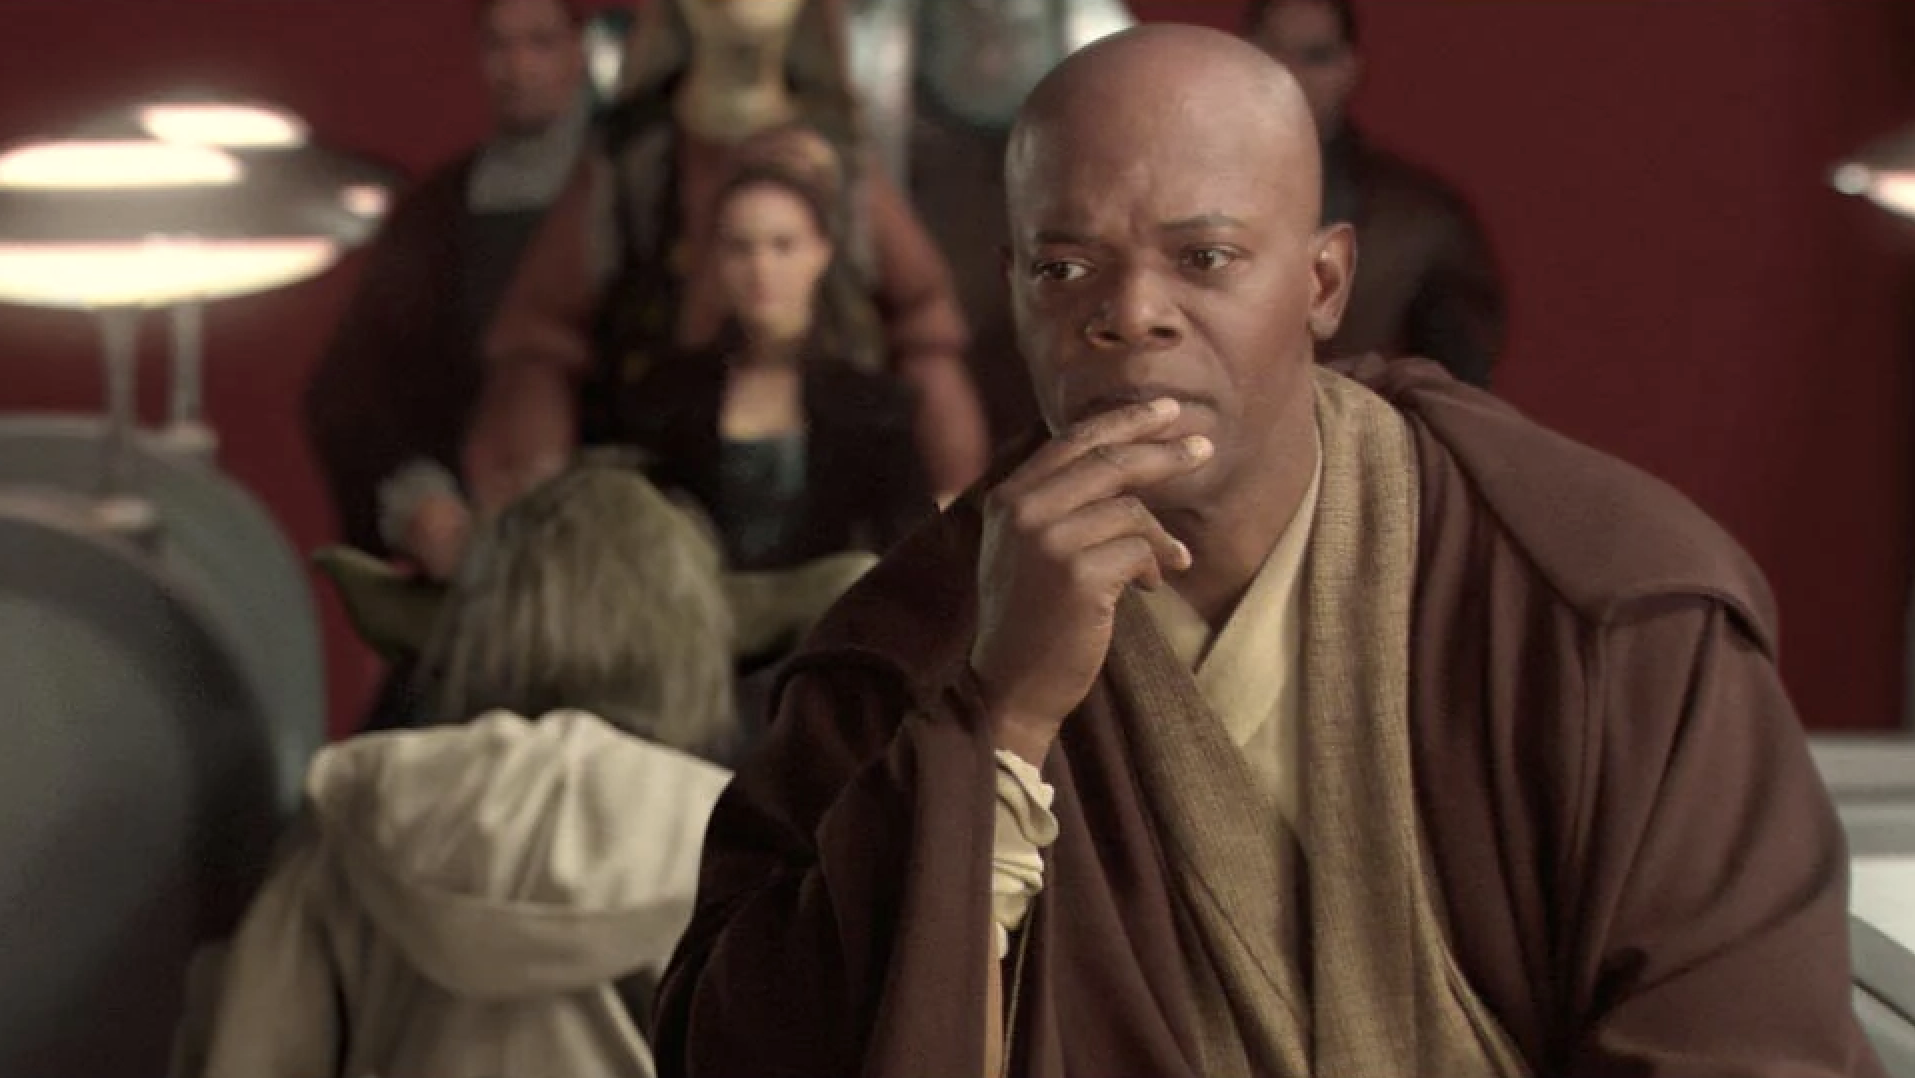 2. Did Mace Windu somehow survive Revenge Of The Sith?